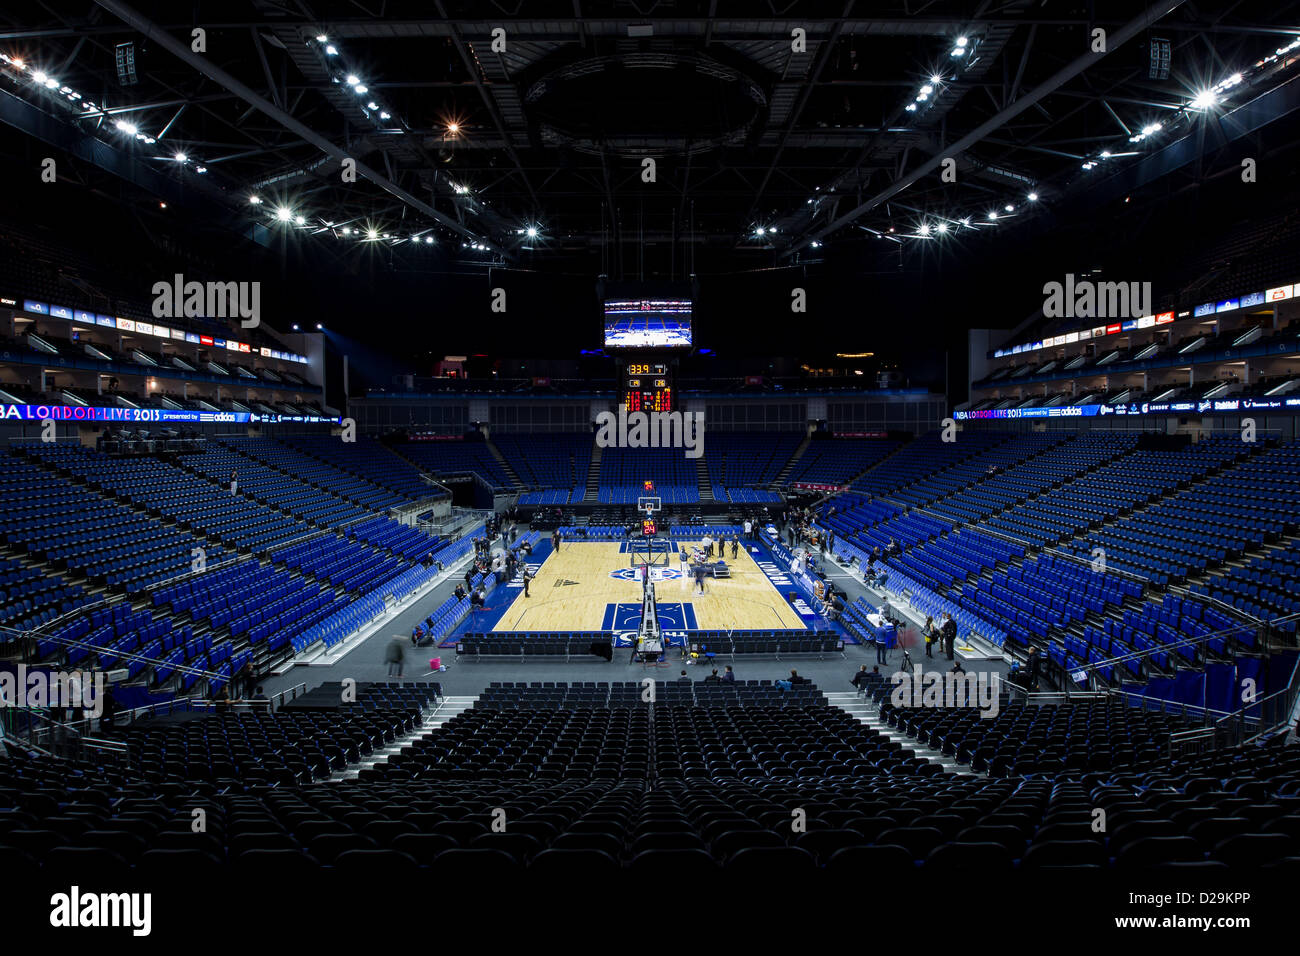 17.01.2013 London, England. The purpose built basketball court at the O2 ahead of the NBA London Live 2013 game between the Detroit Pistons and the New York Knicks Stock Photo